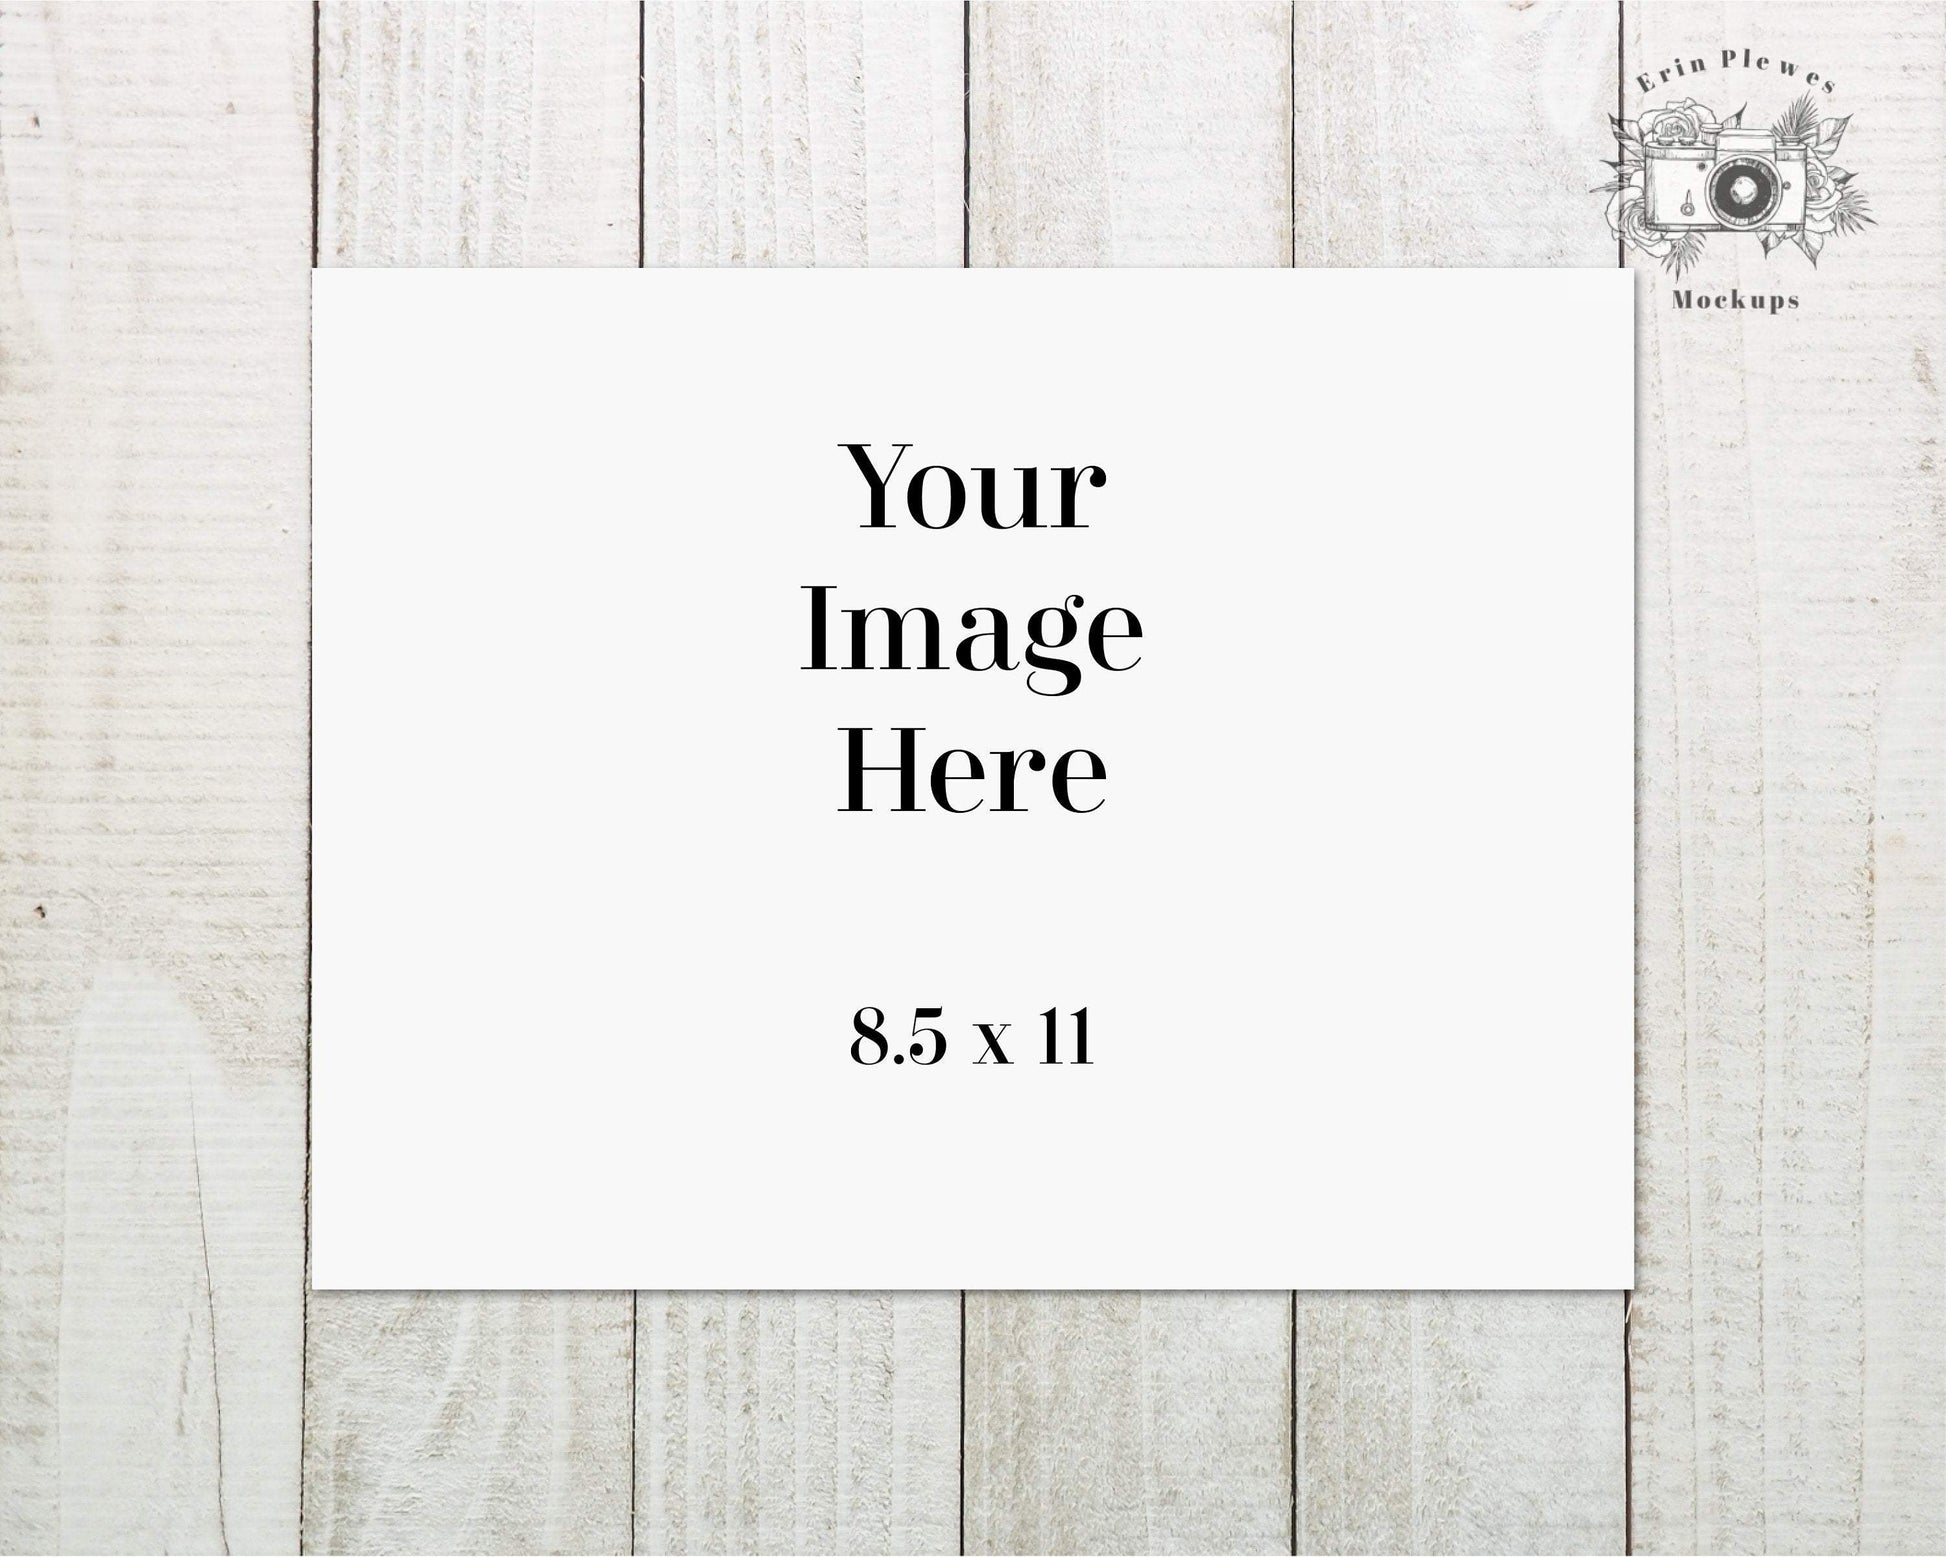 Erin Plewes Mockups 8.5 x 11 Print Mockup, 8.5x11 Paper mockup on white wood farmhouse styled stock photo, Stationery Mock-up, Instant Digital Download Template